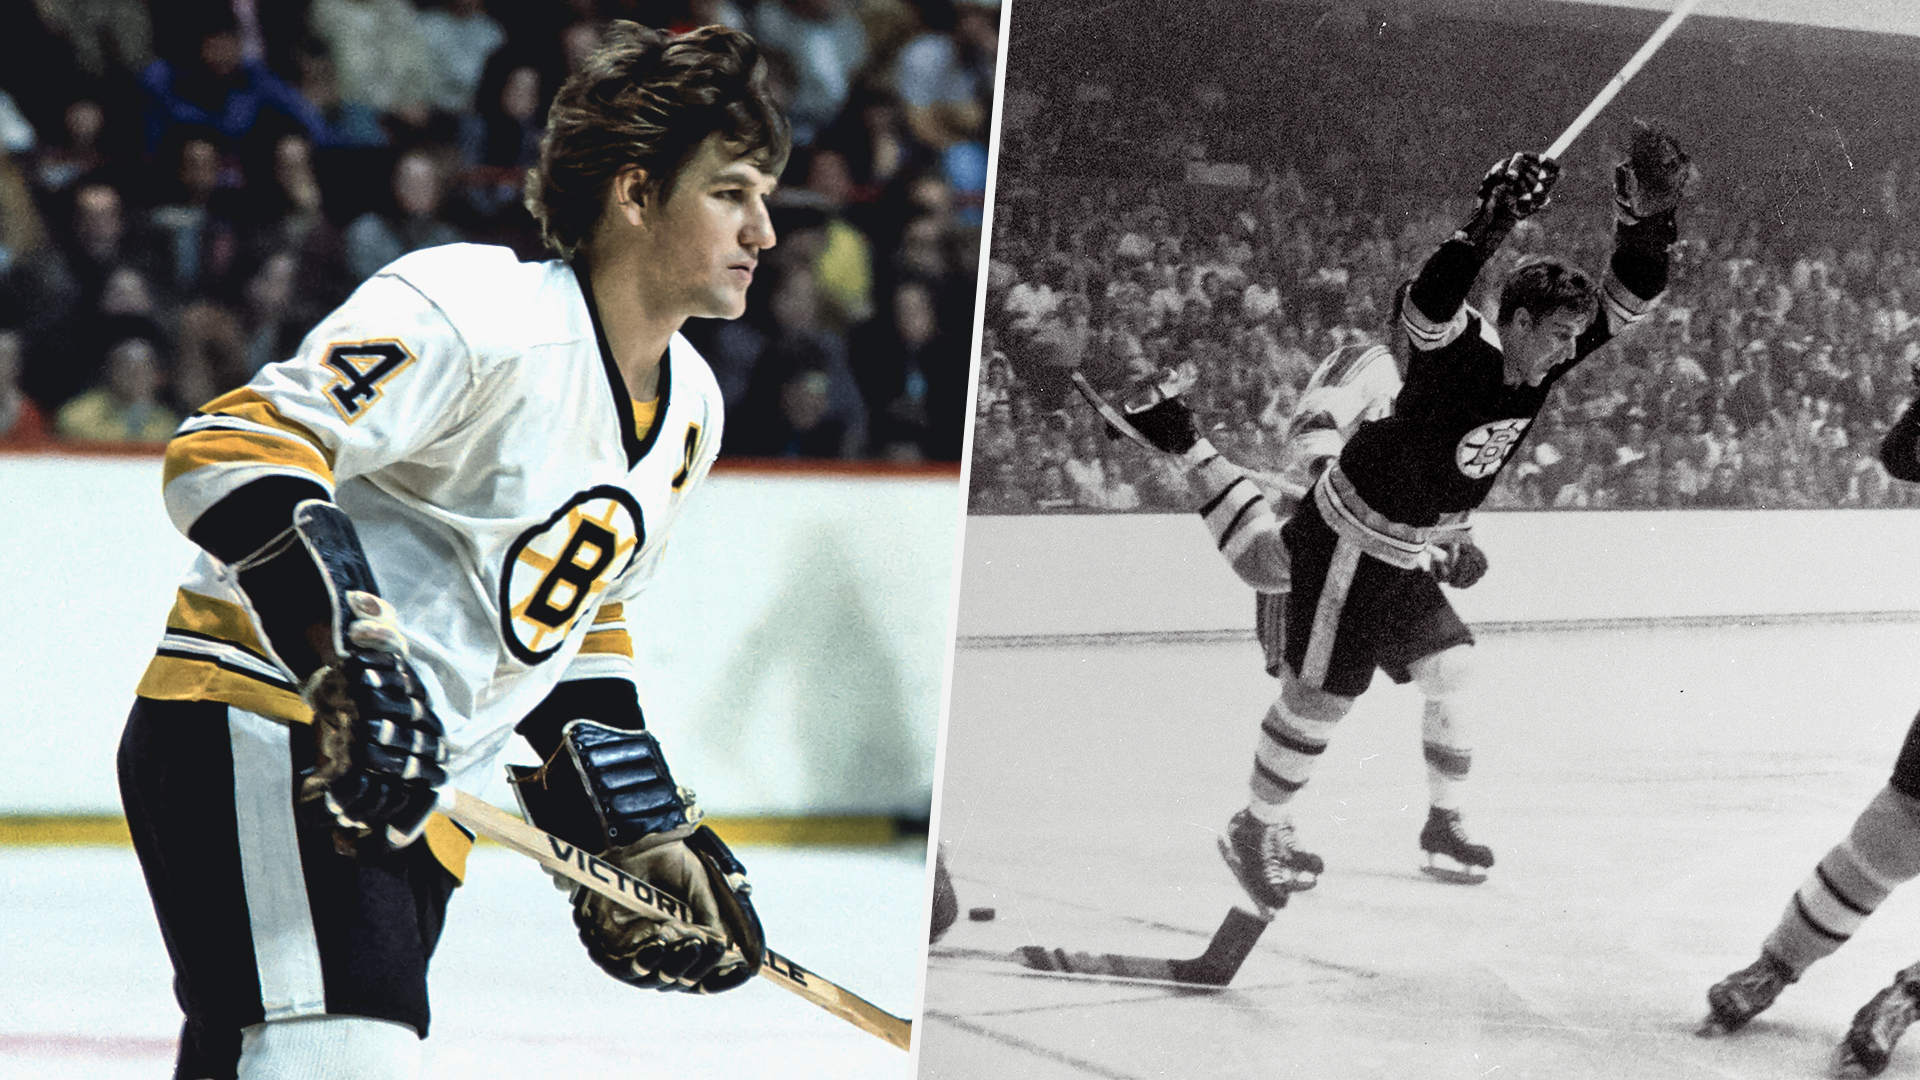 Bruins: Bobby Orr is the greatest defenseman of all-time